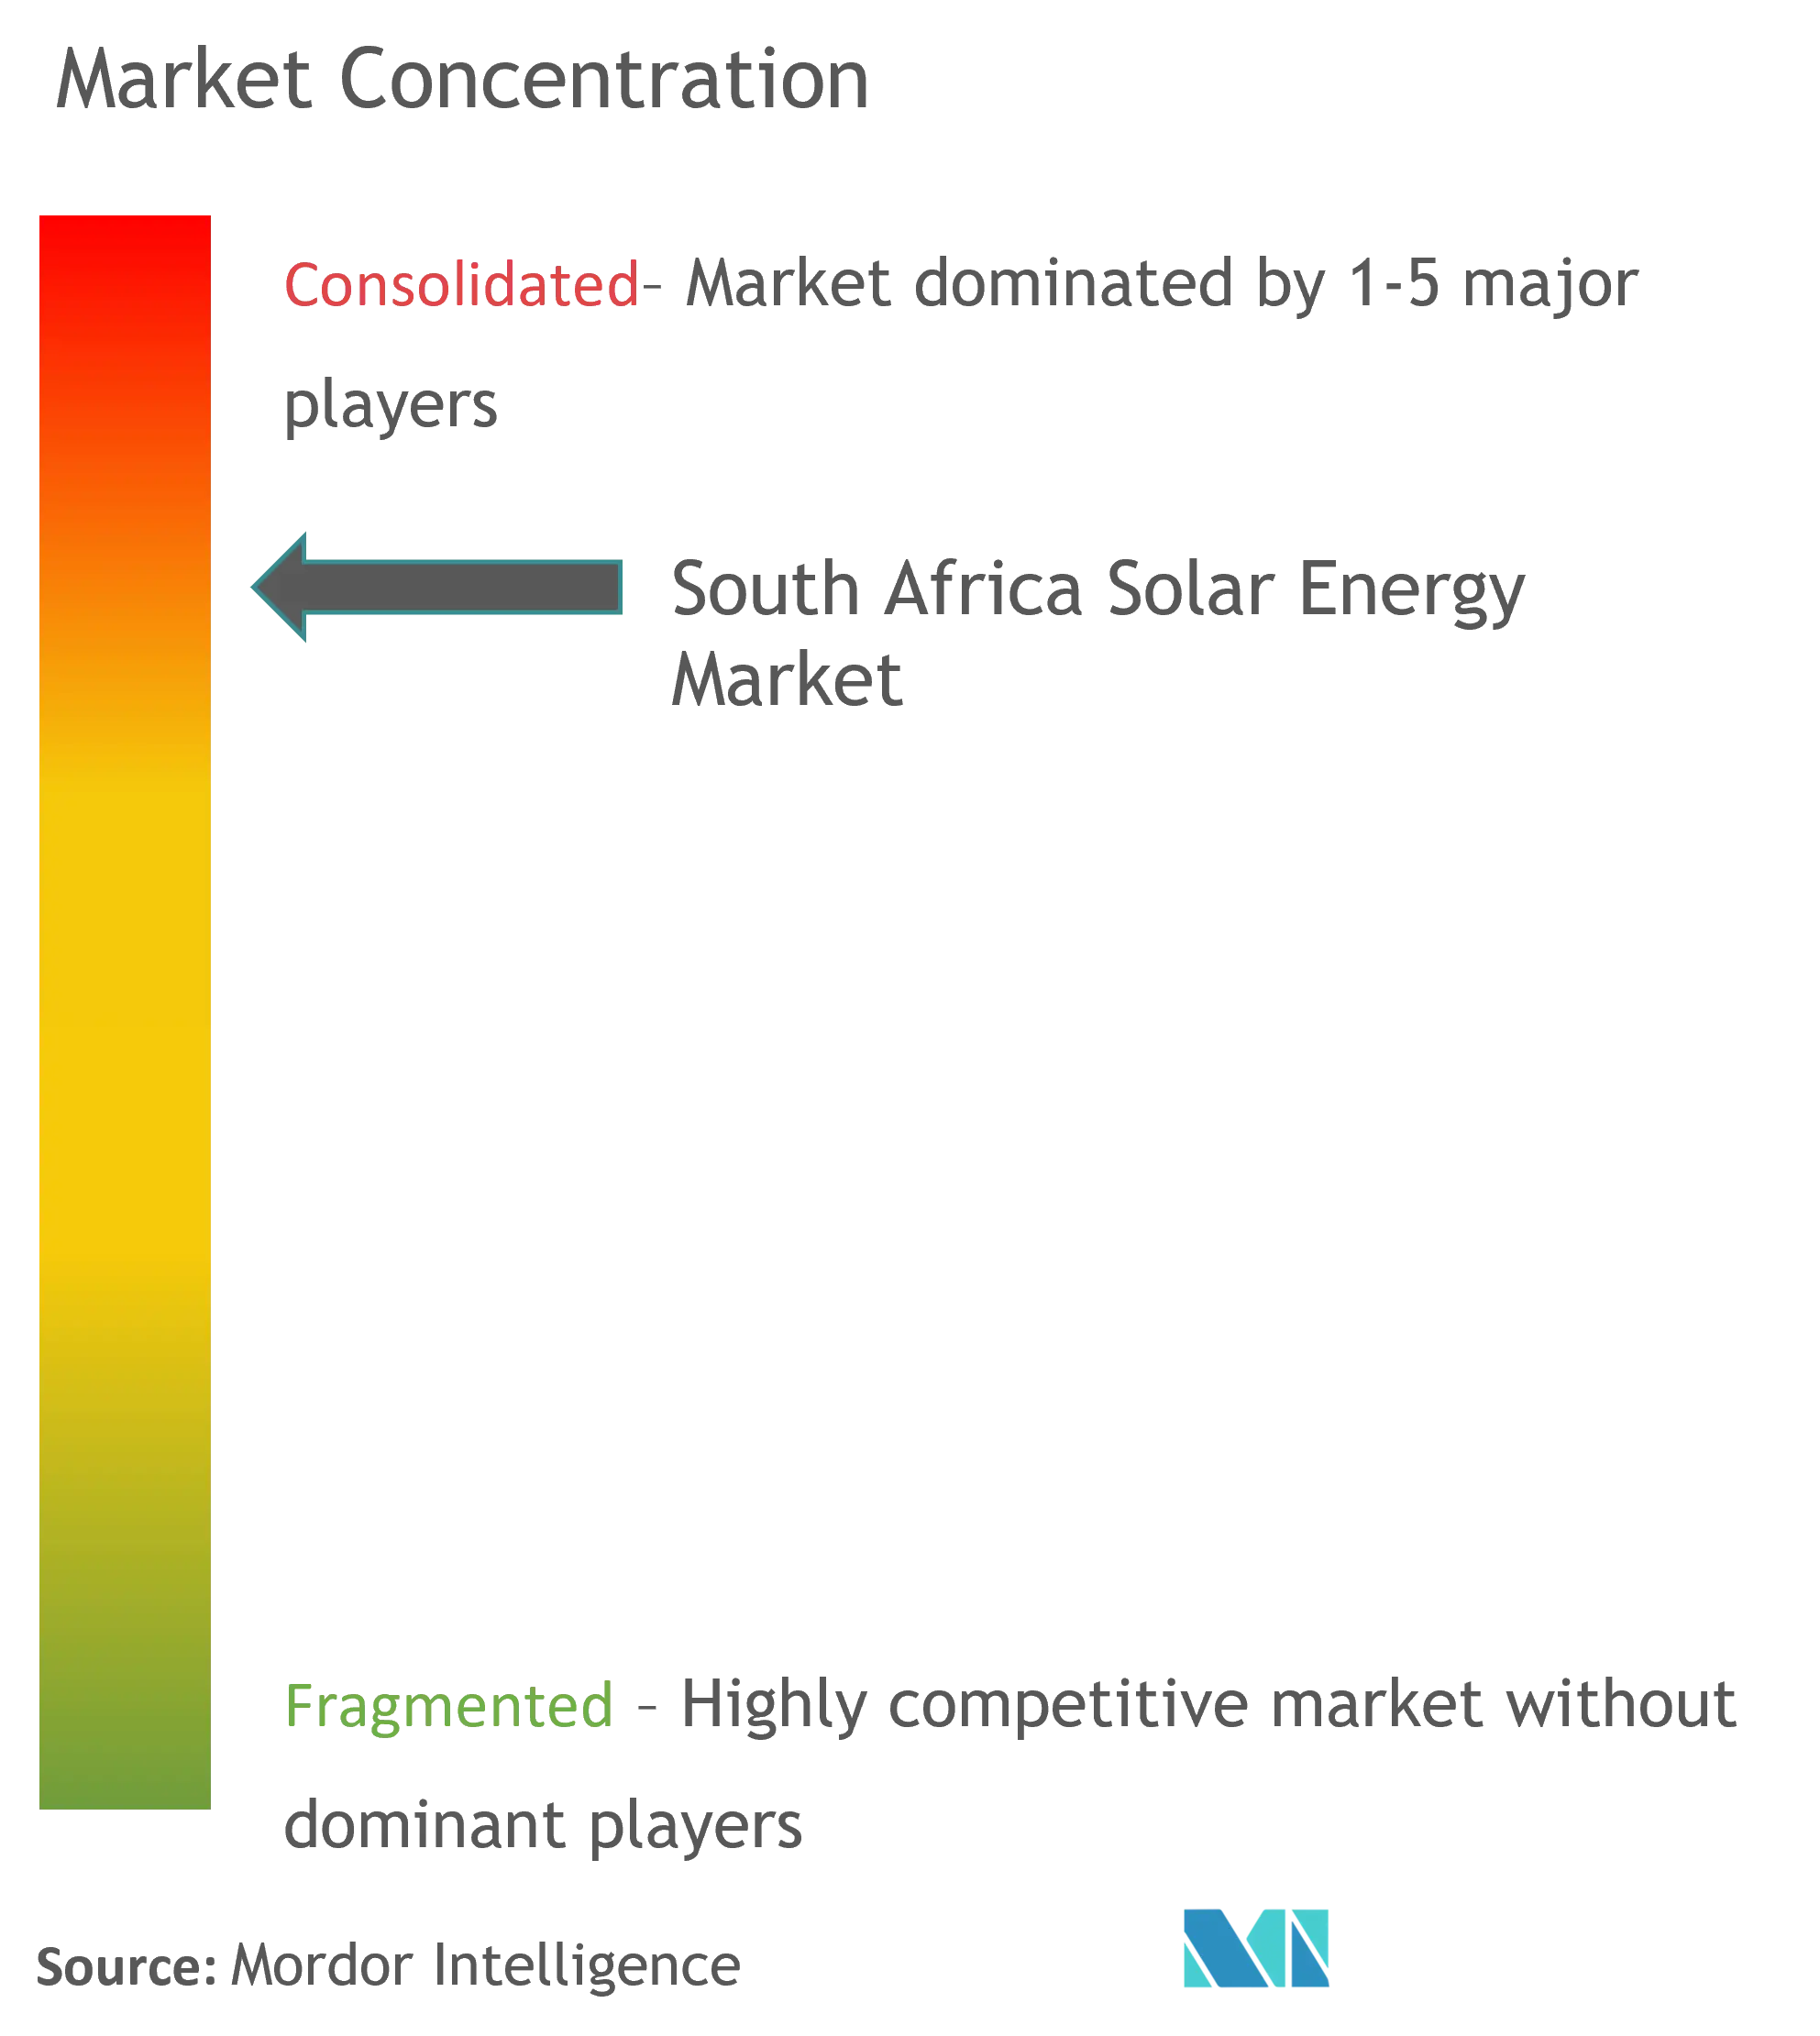 South Africa Solar Energy Market Concentration